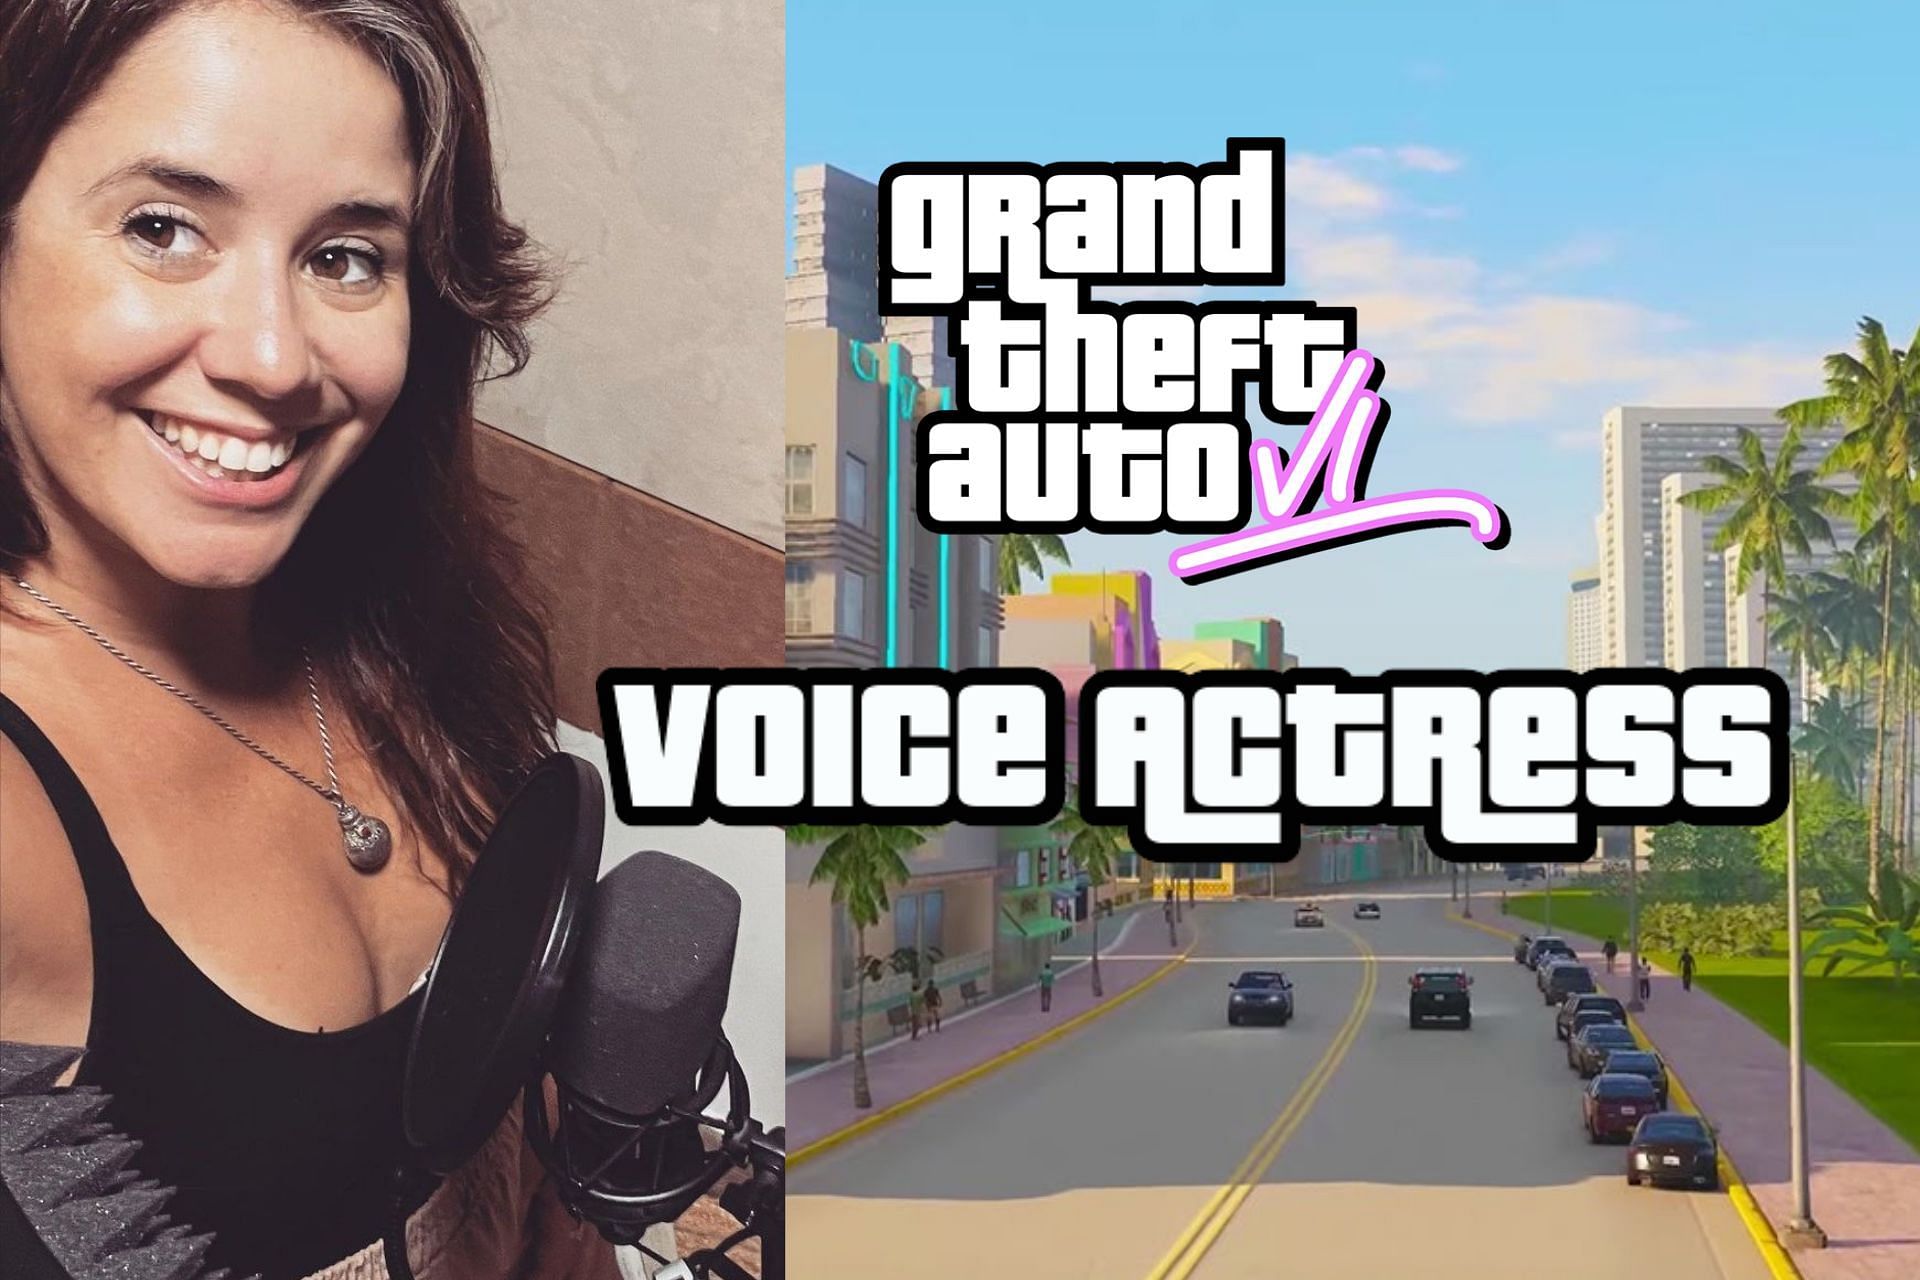 People have claimed to find GTA 6 protagonist